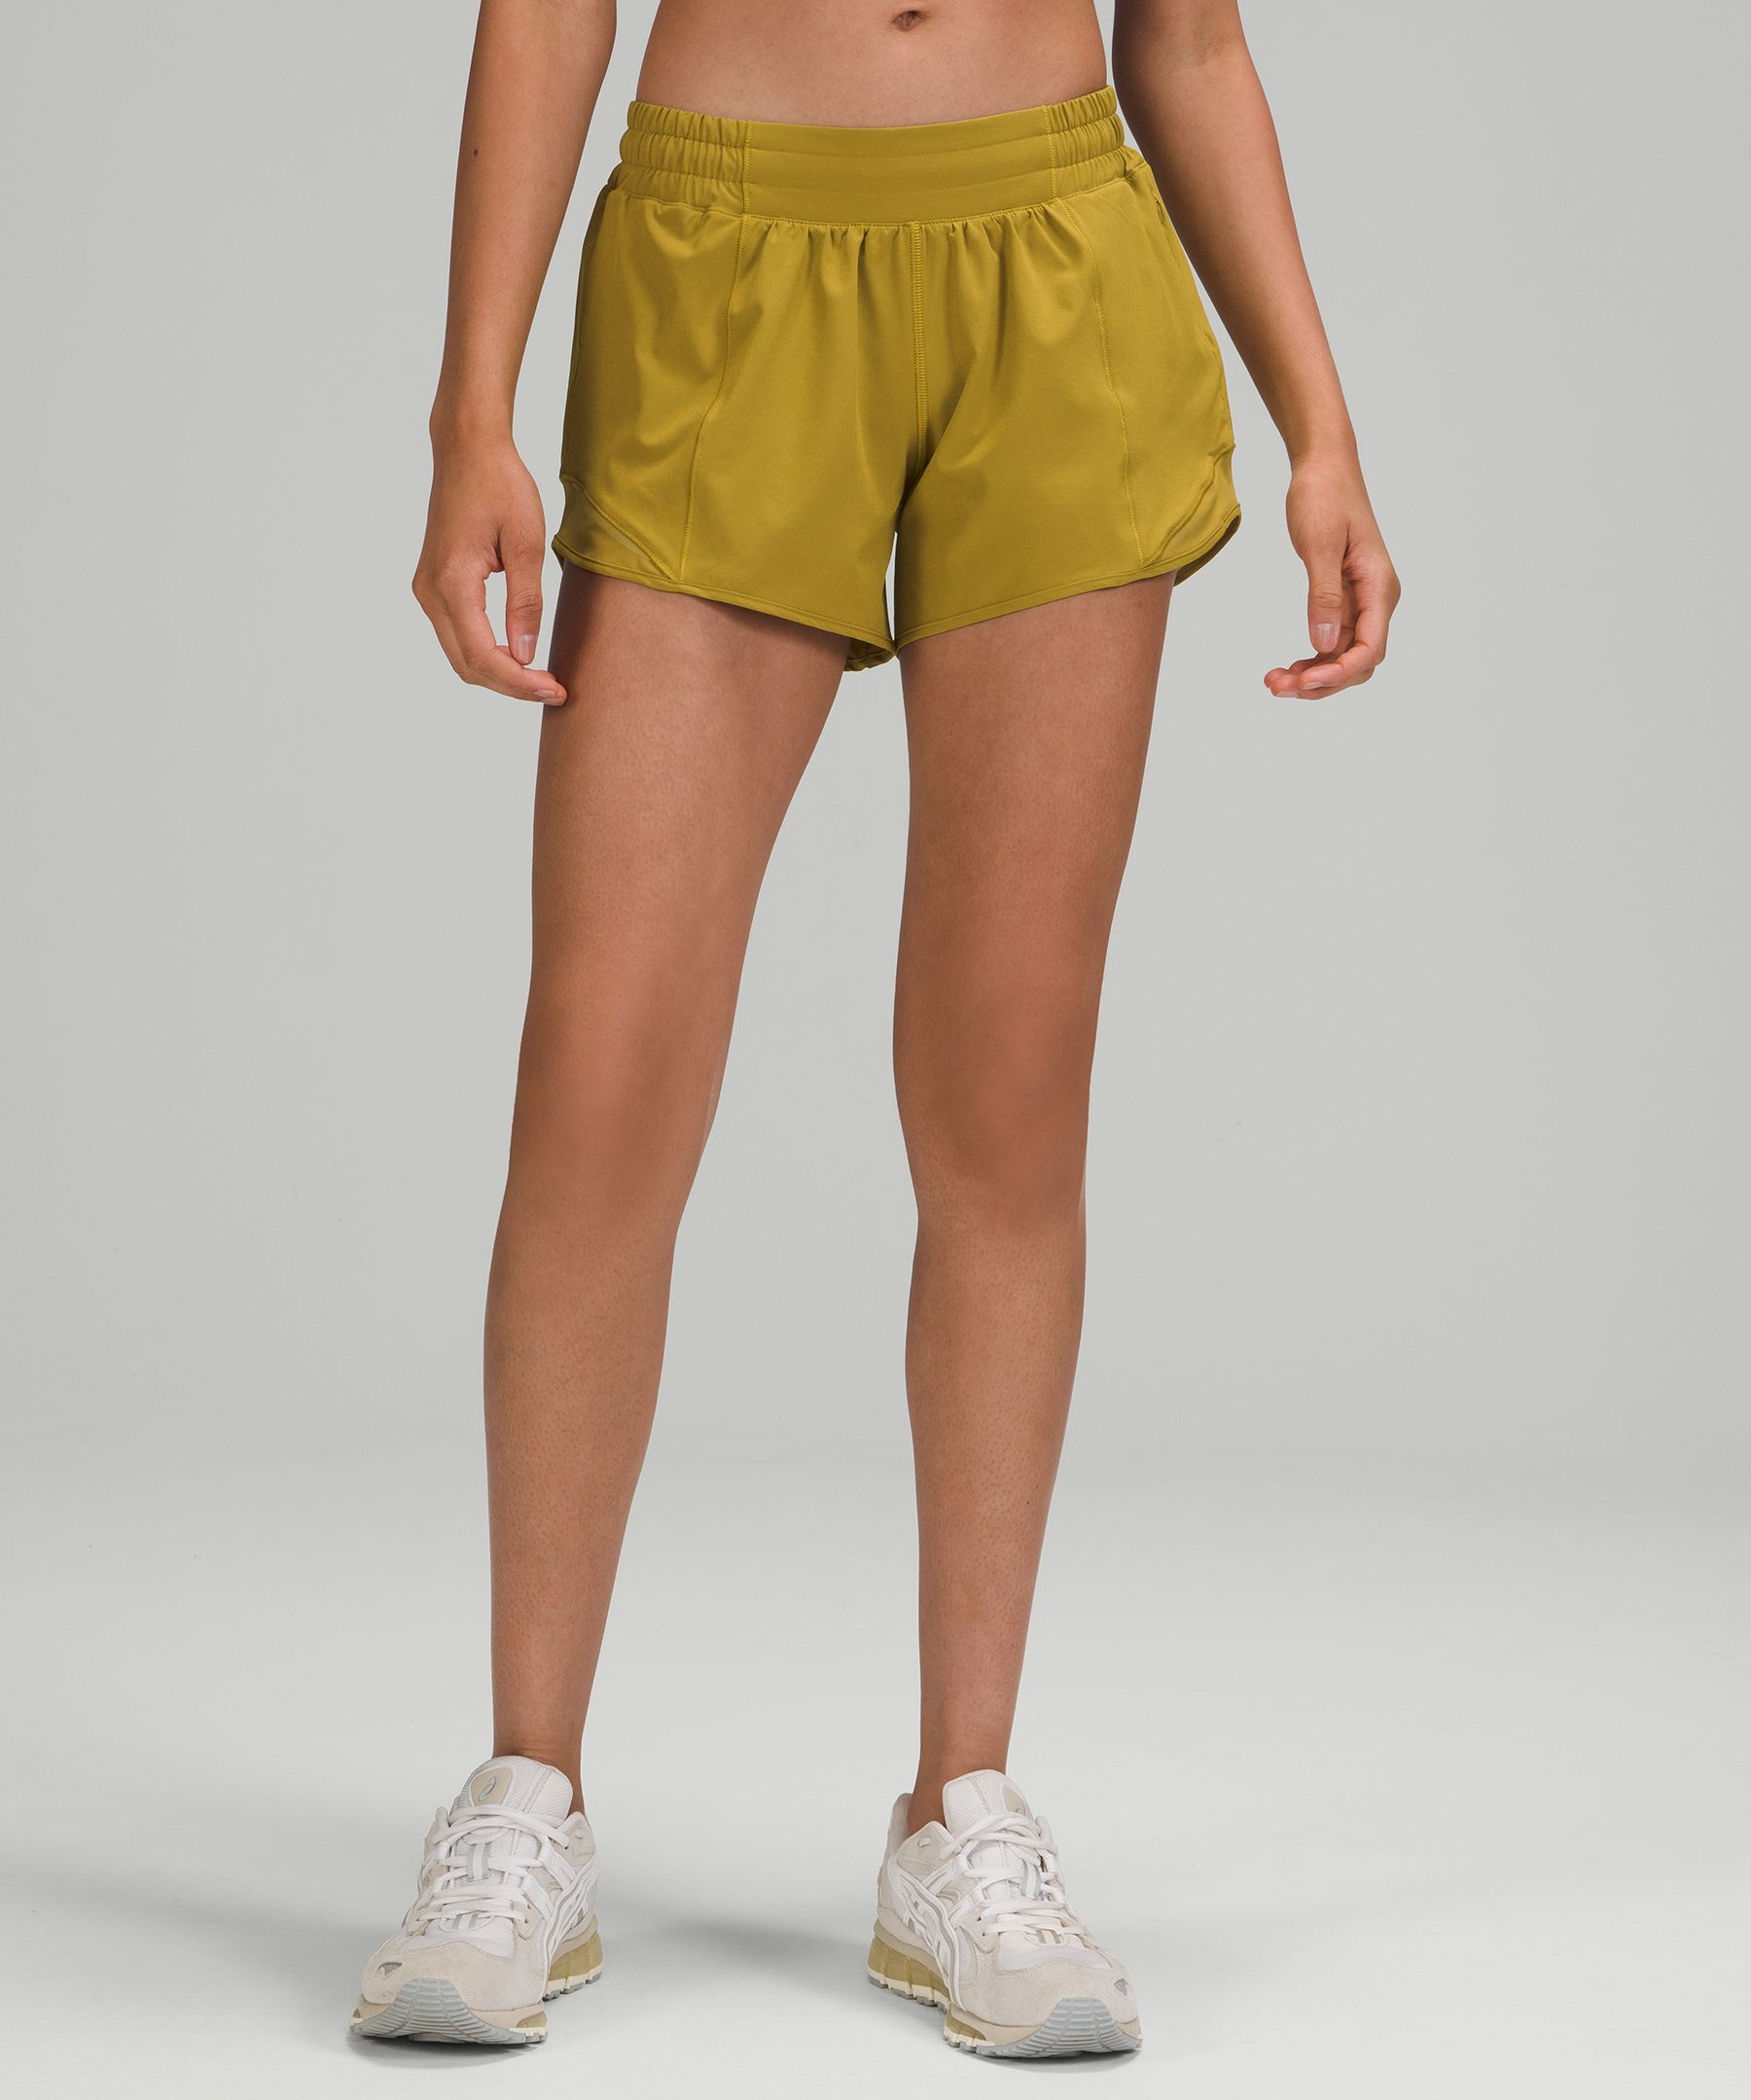 Lululemon Hotty Hot Low-rise Lined Shorts 4" In Auric Gold